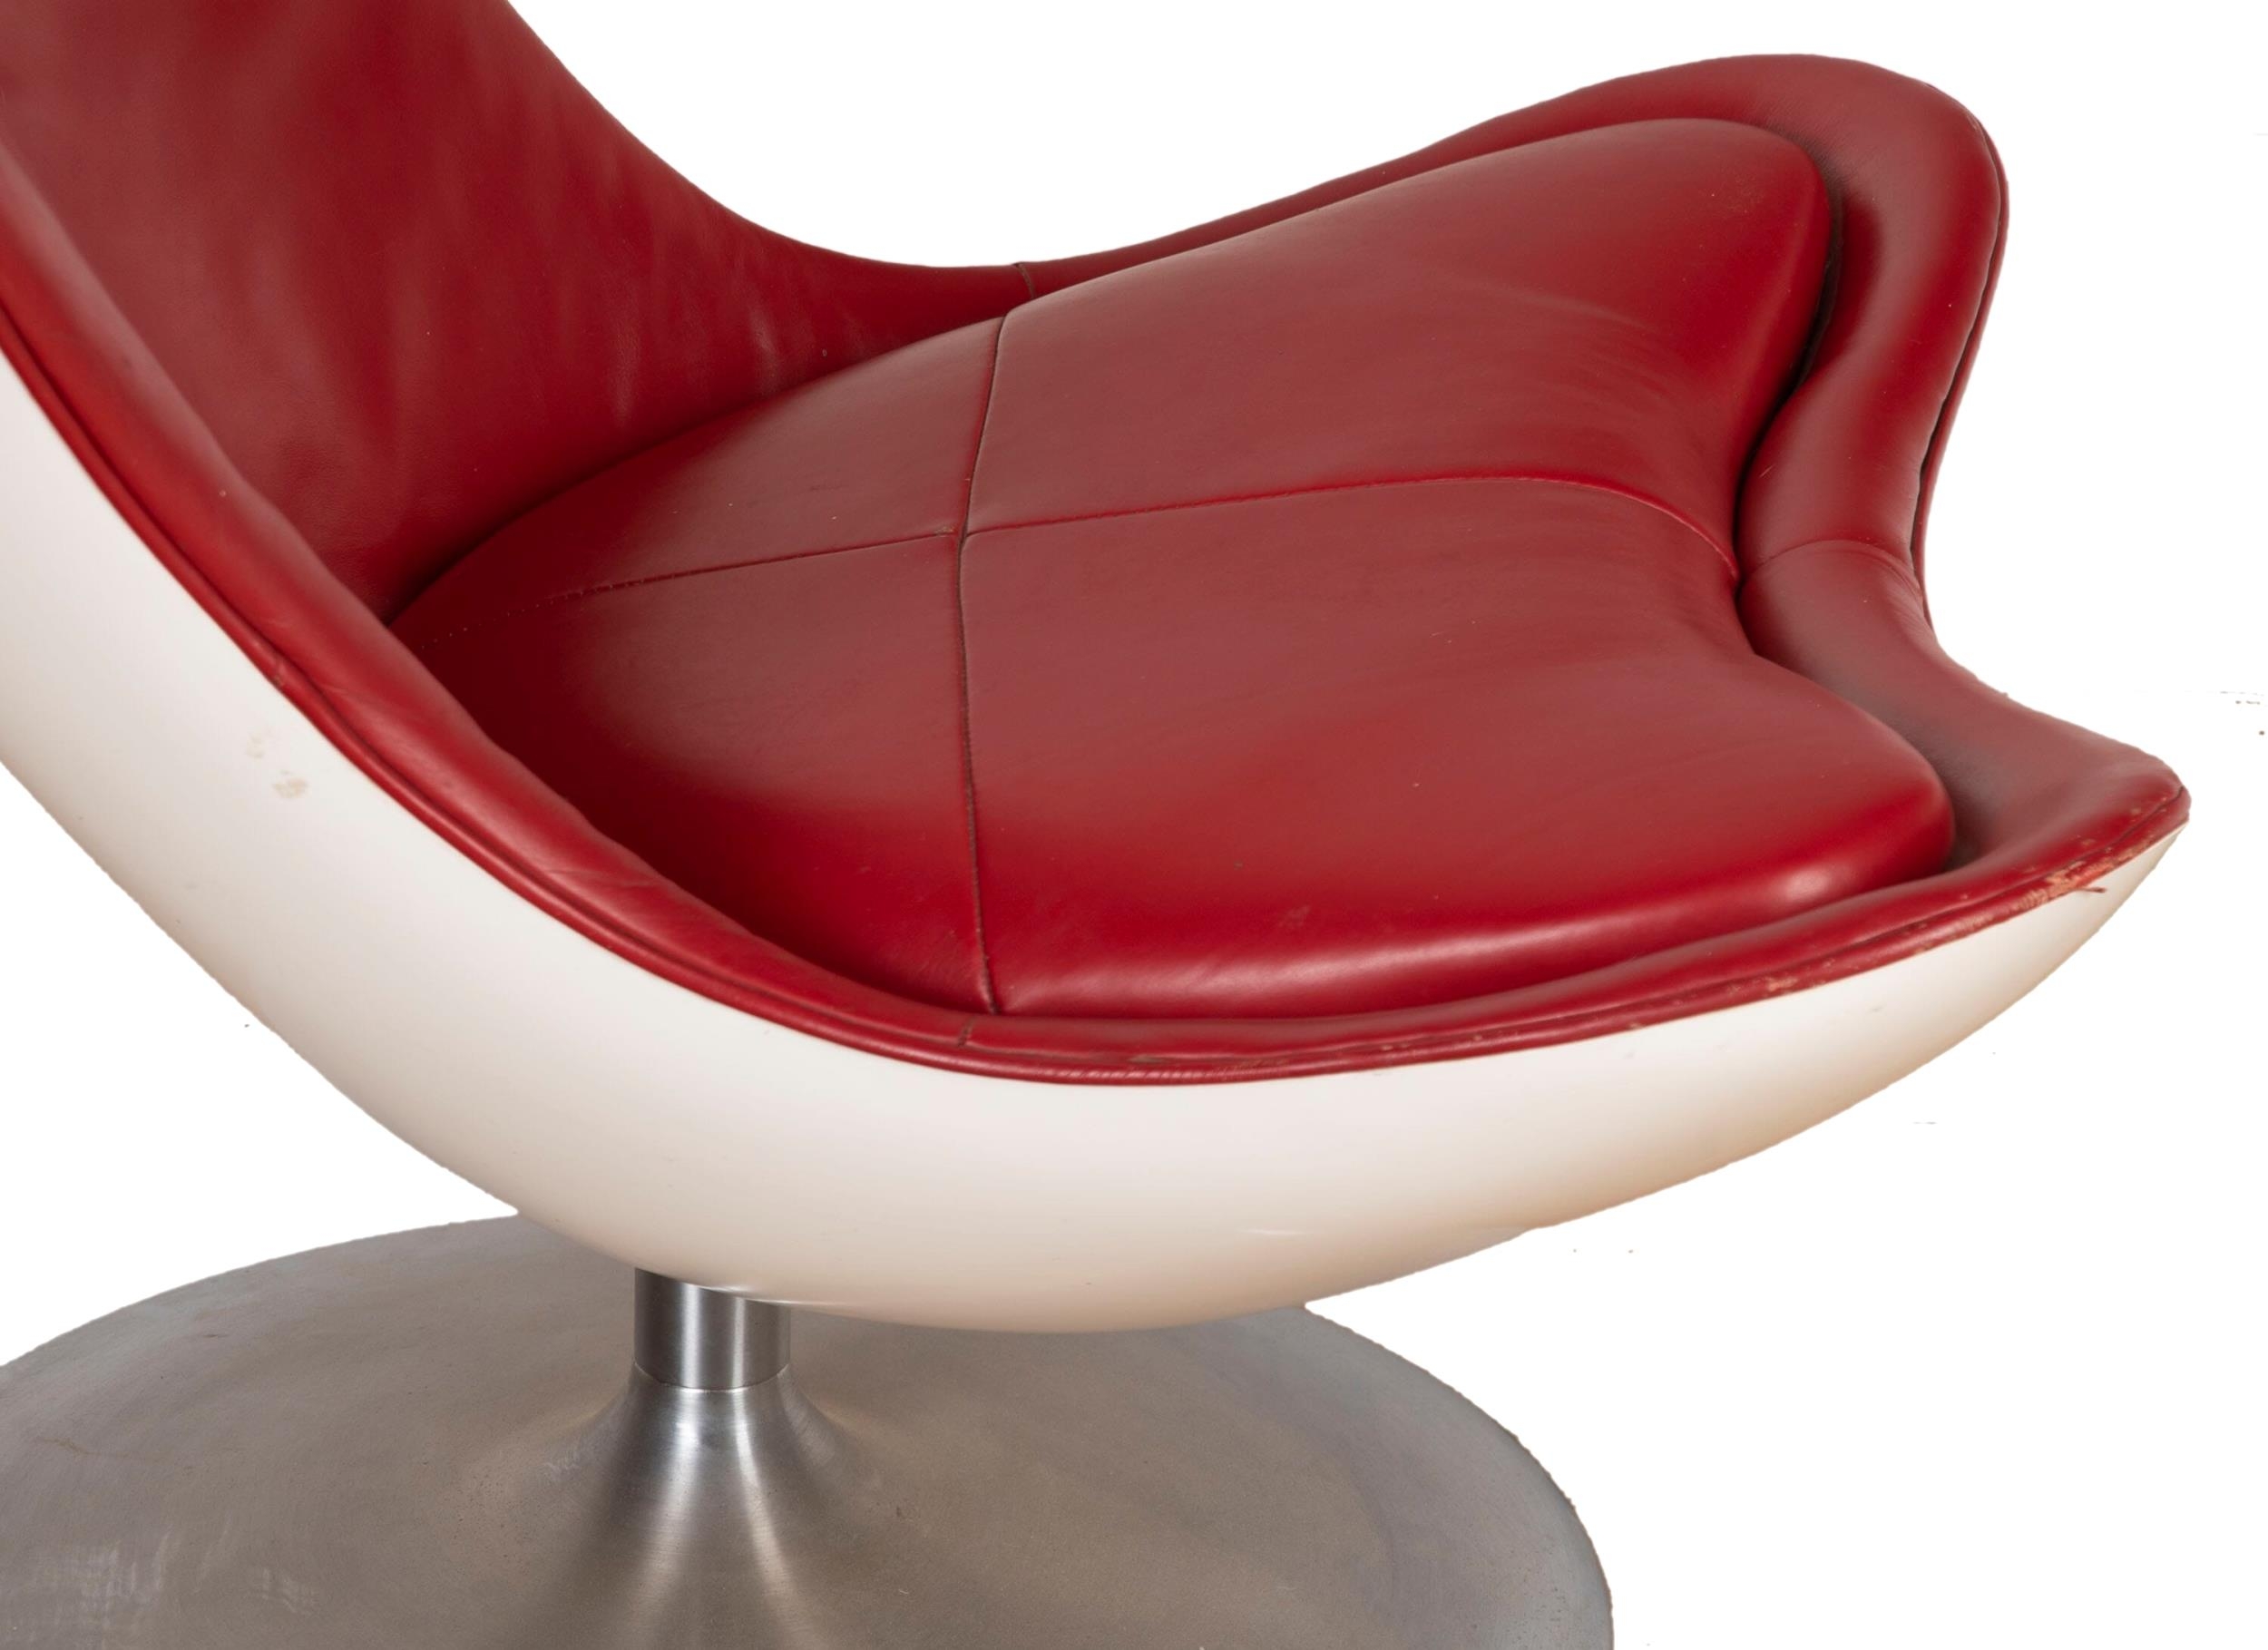 Sir Terence Conran (1931-2020) - Glove chair, red leather upholstery on a polished fibreglass, 103cm - Image 2 of 2